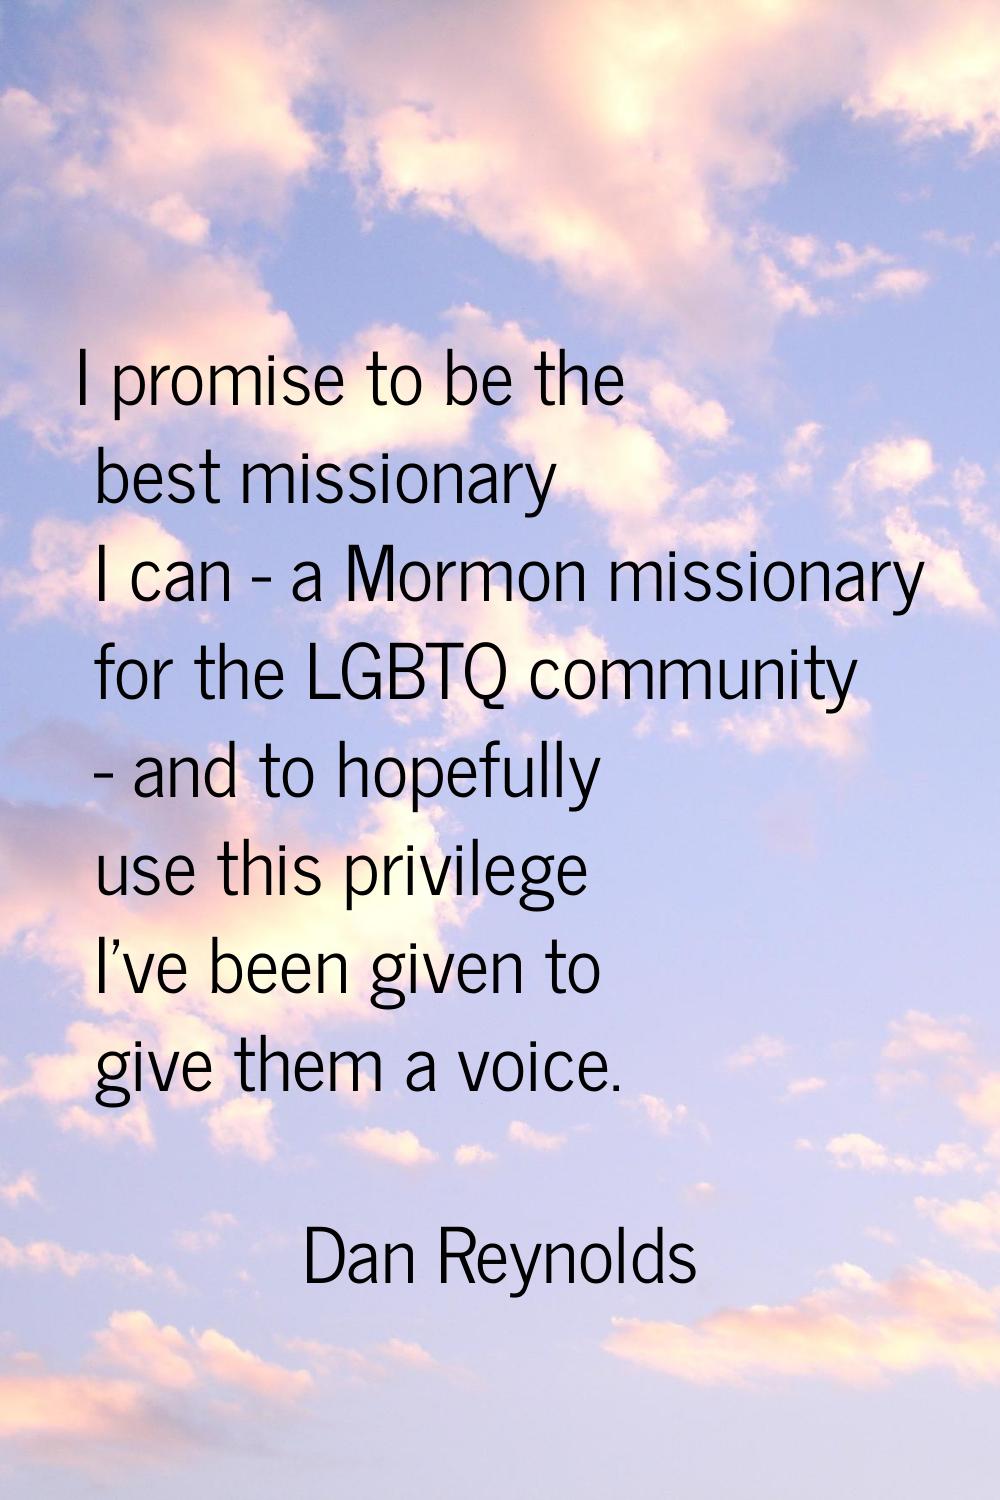 I promise to be the best missionary I can - a Mormon missionary for the LGBTQ community - and to ho